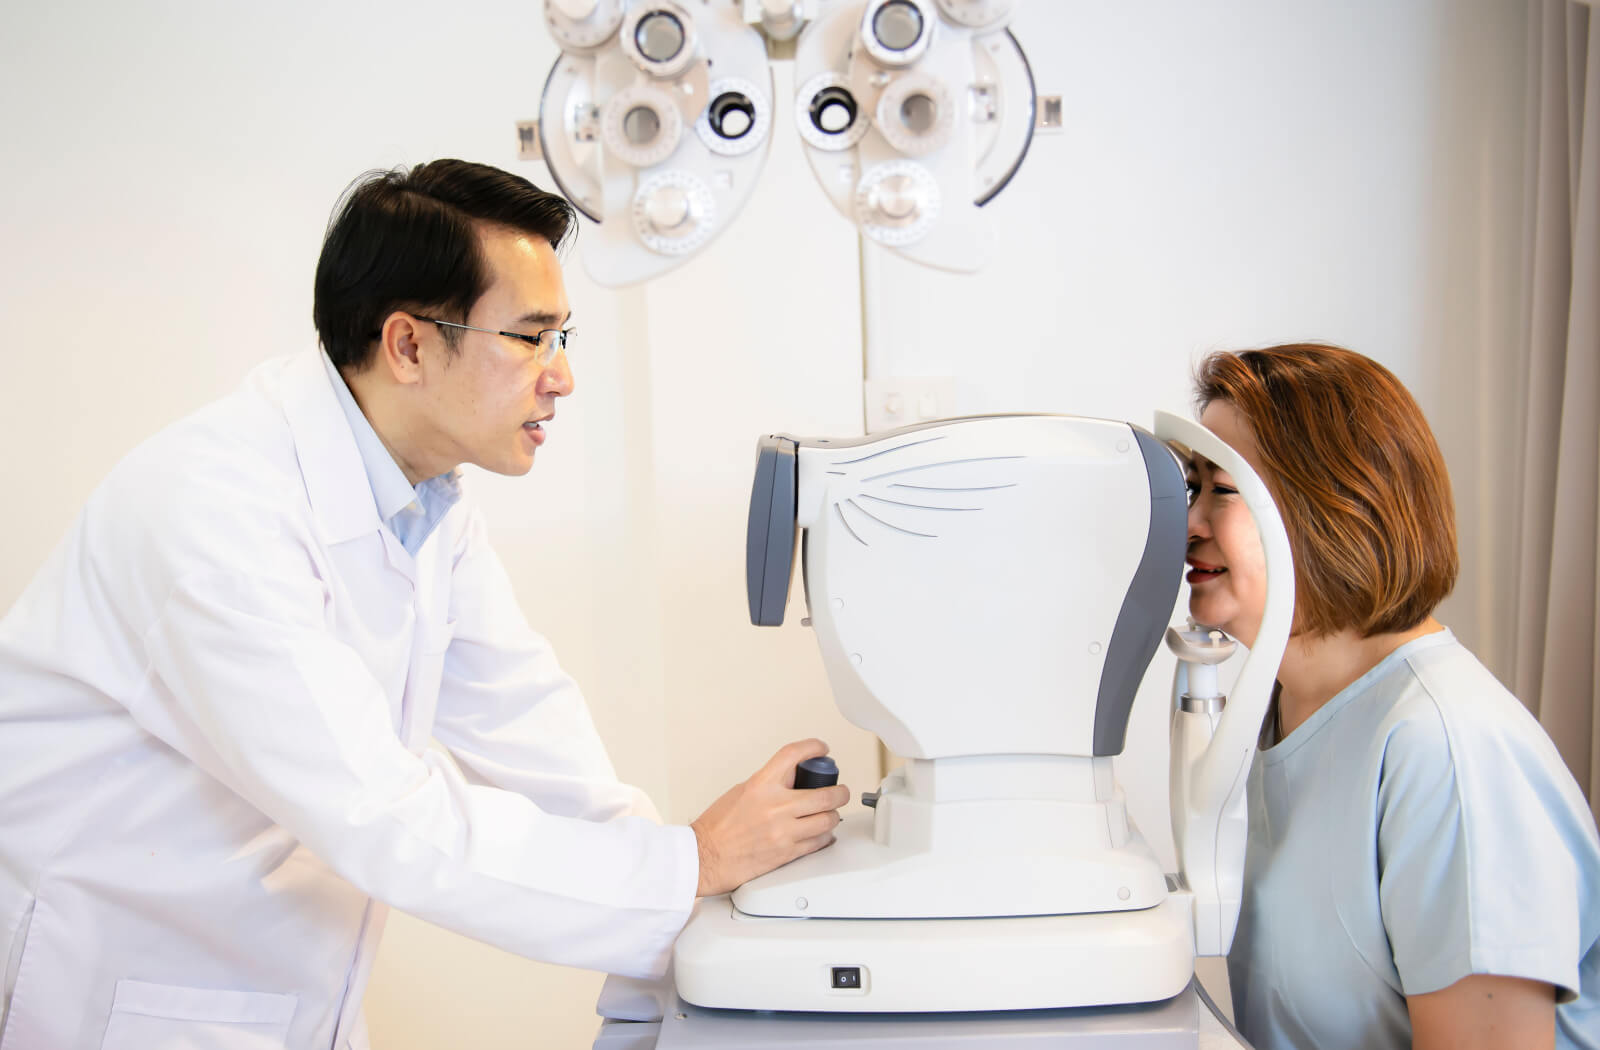 A male optometrist examines a mid-age female patient's eyesight with the use of an automated refractor machine used to determine a person's refractive error.